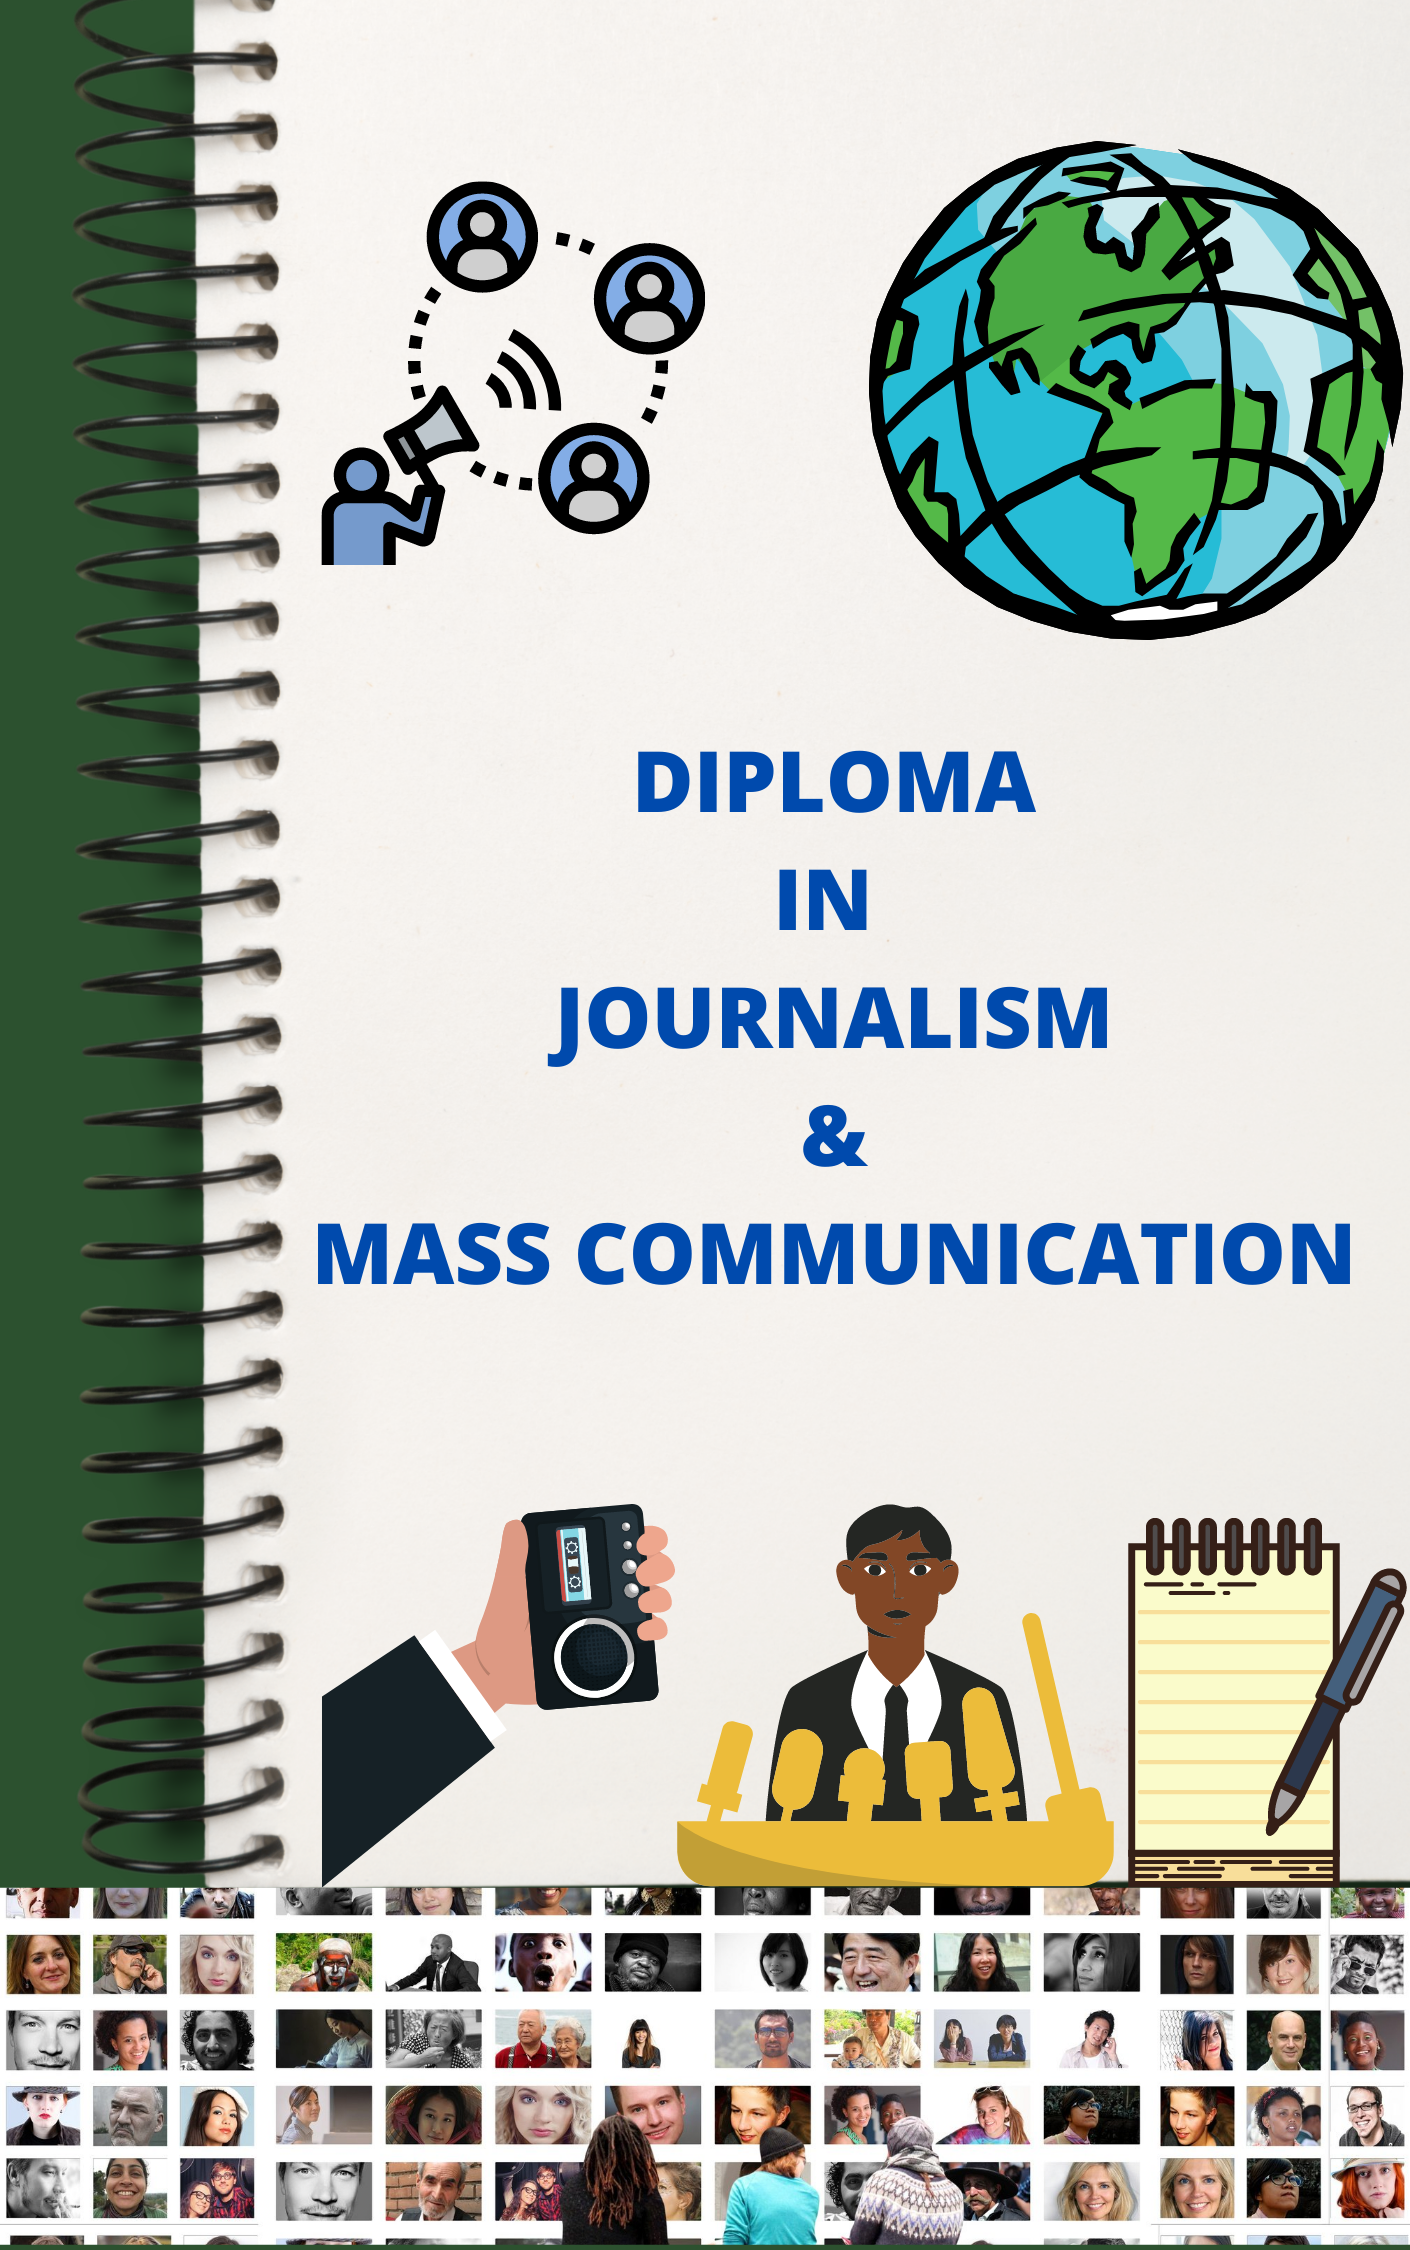 DIPLOMA IN JOURNALISM AND MASS COMMUNICATION